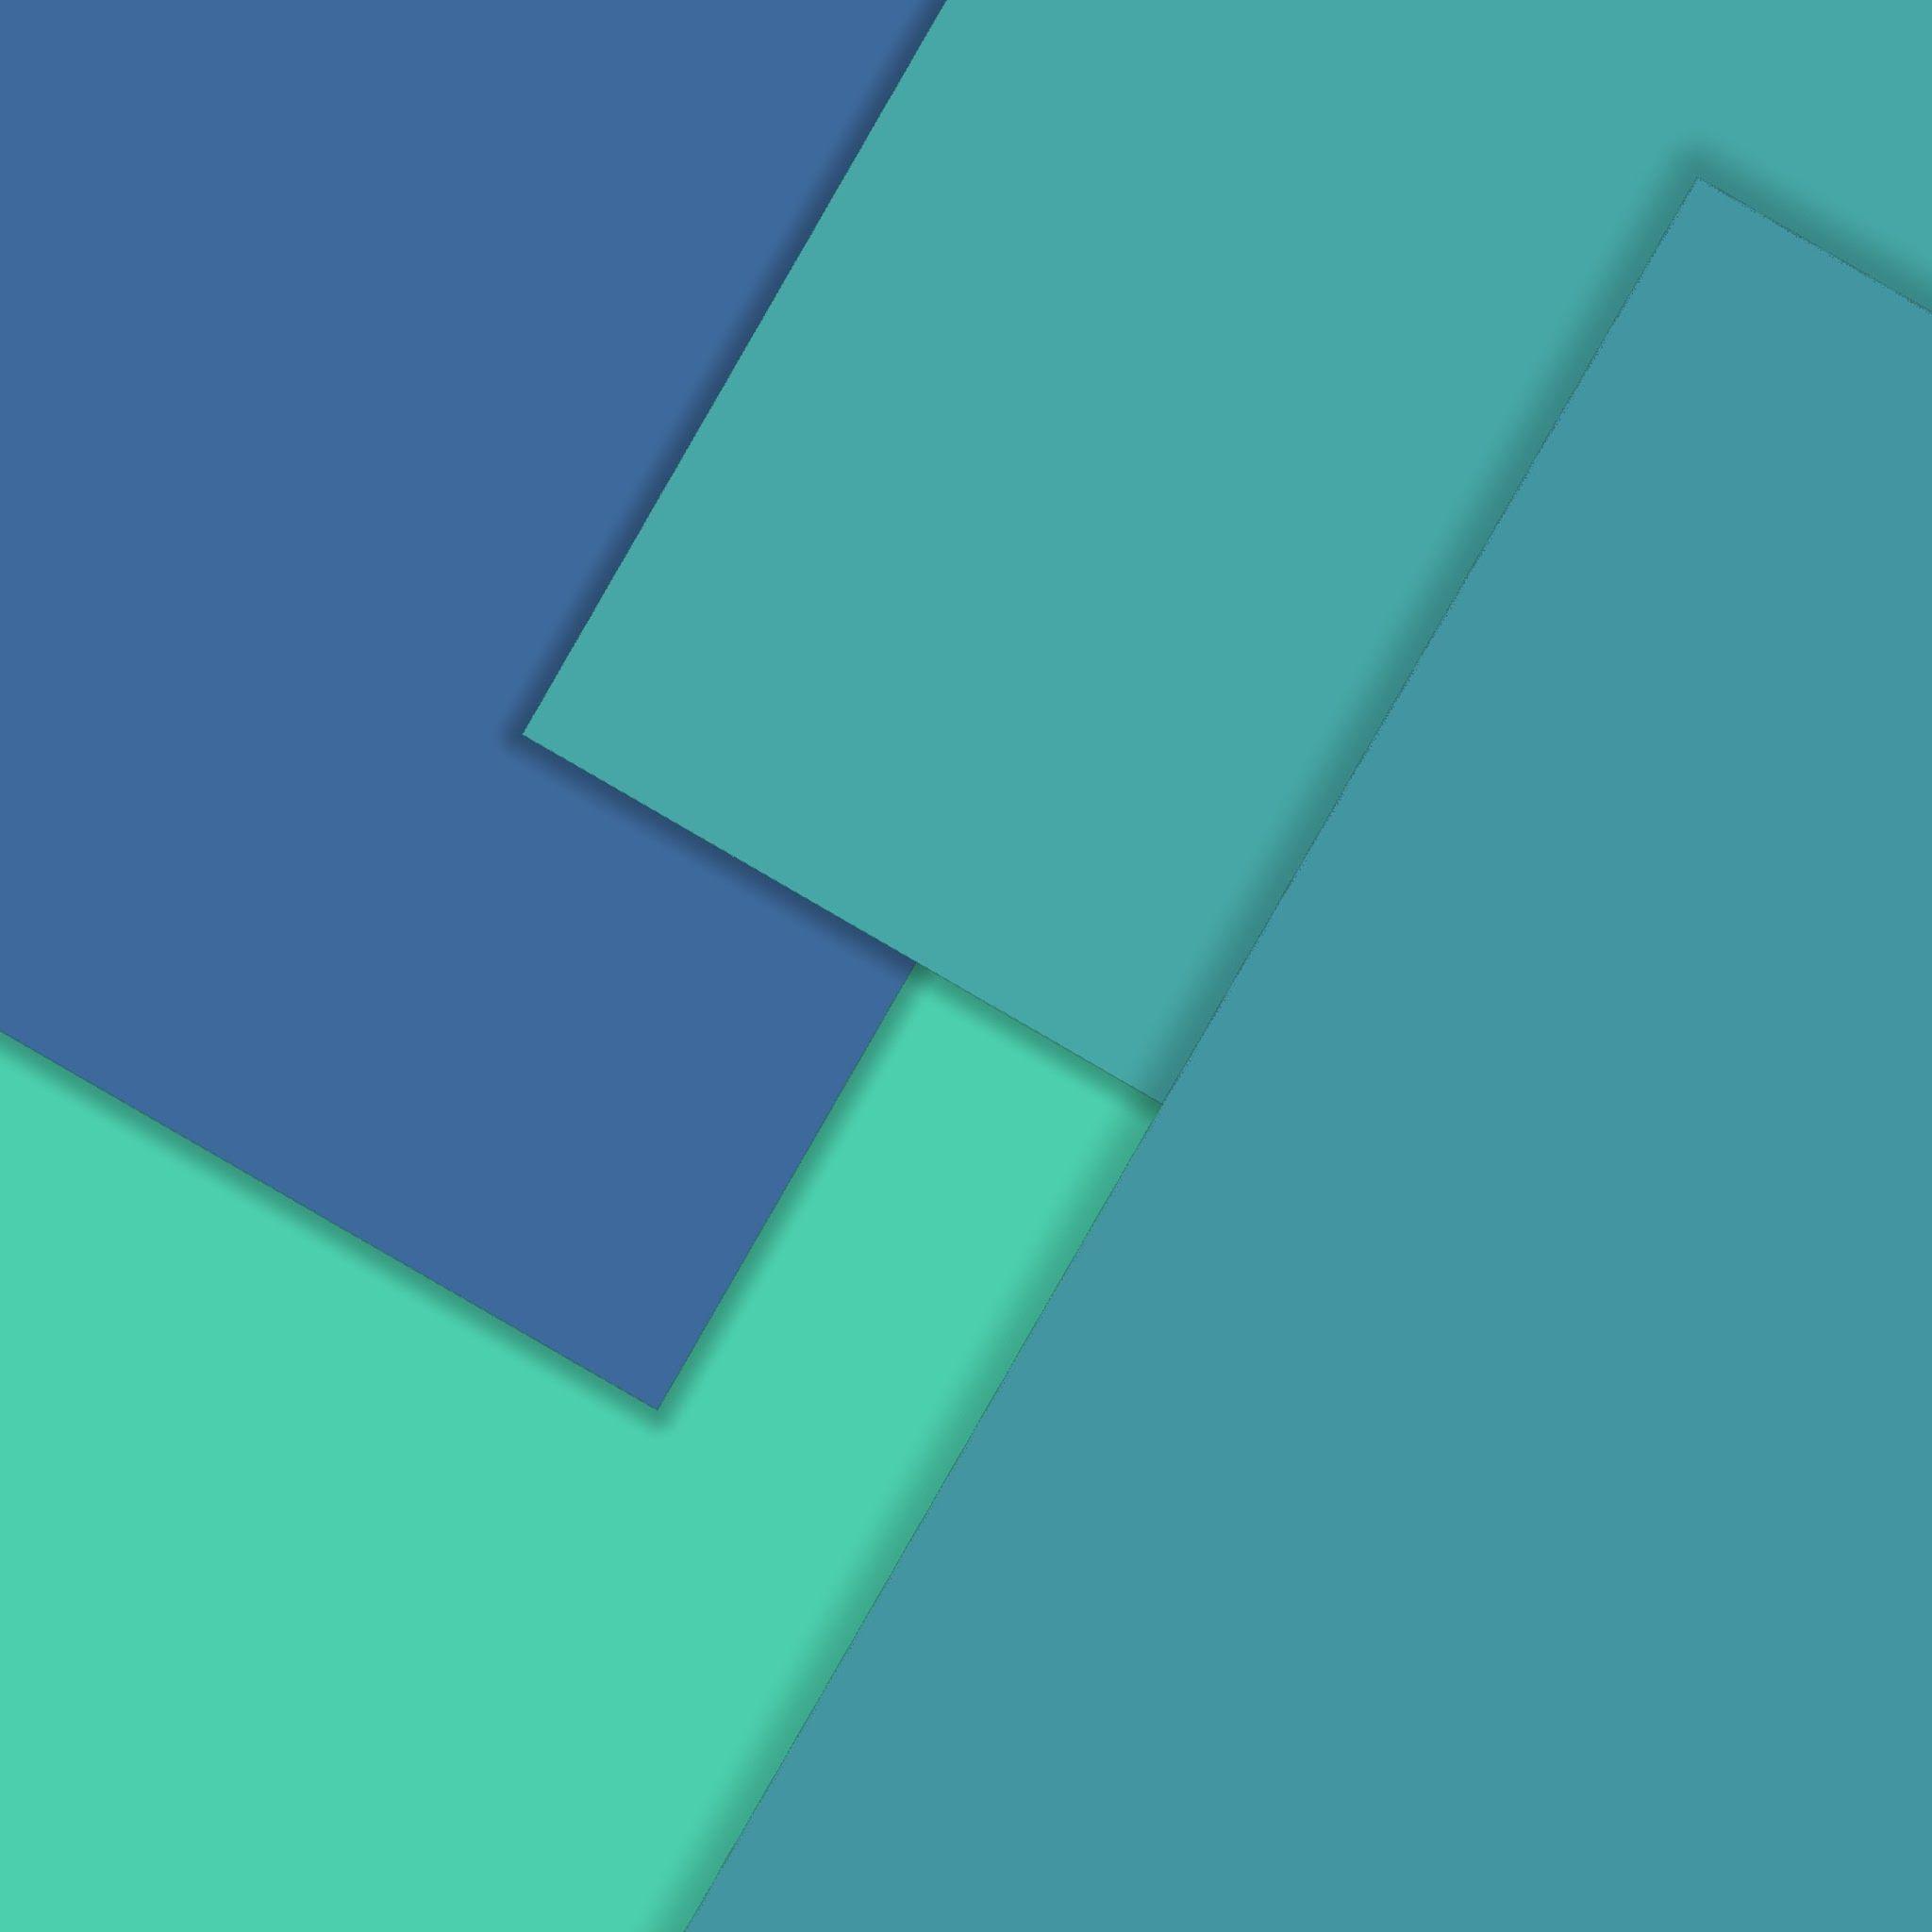 Material Design Inspired Wallpapers Collection For Your Device